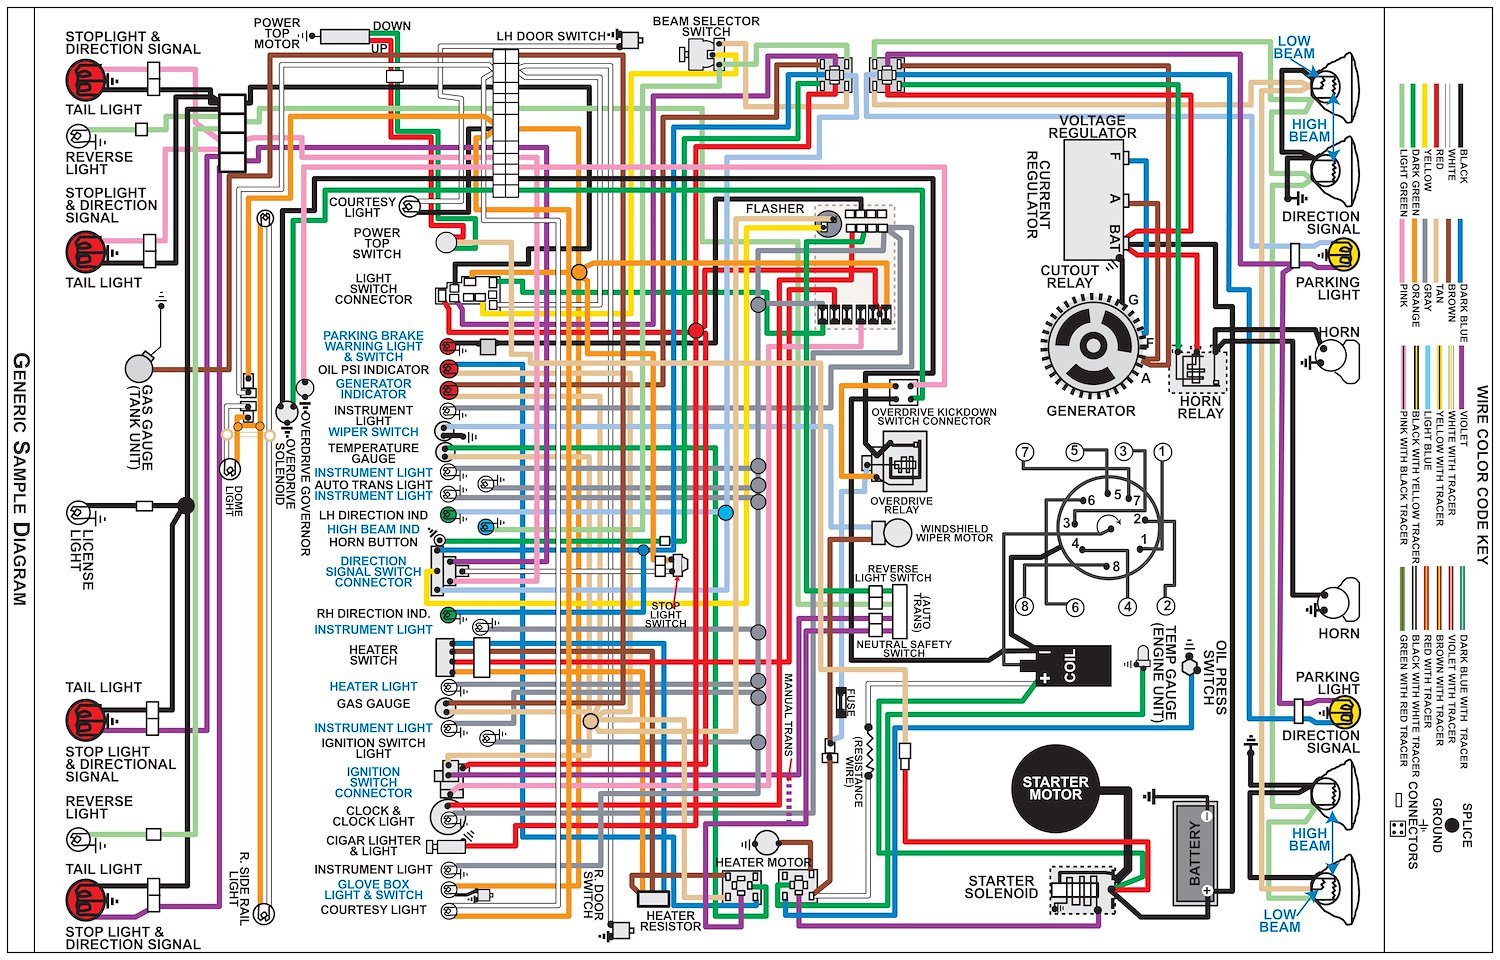 Wiring Diagram for 1949 Chevy Car, 11 in.